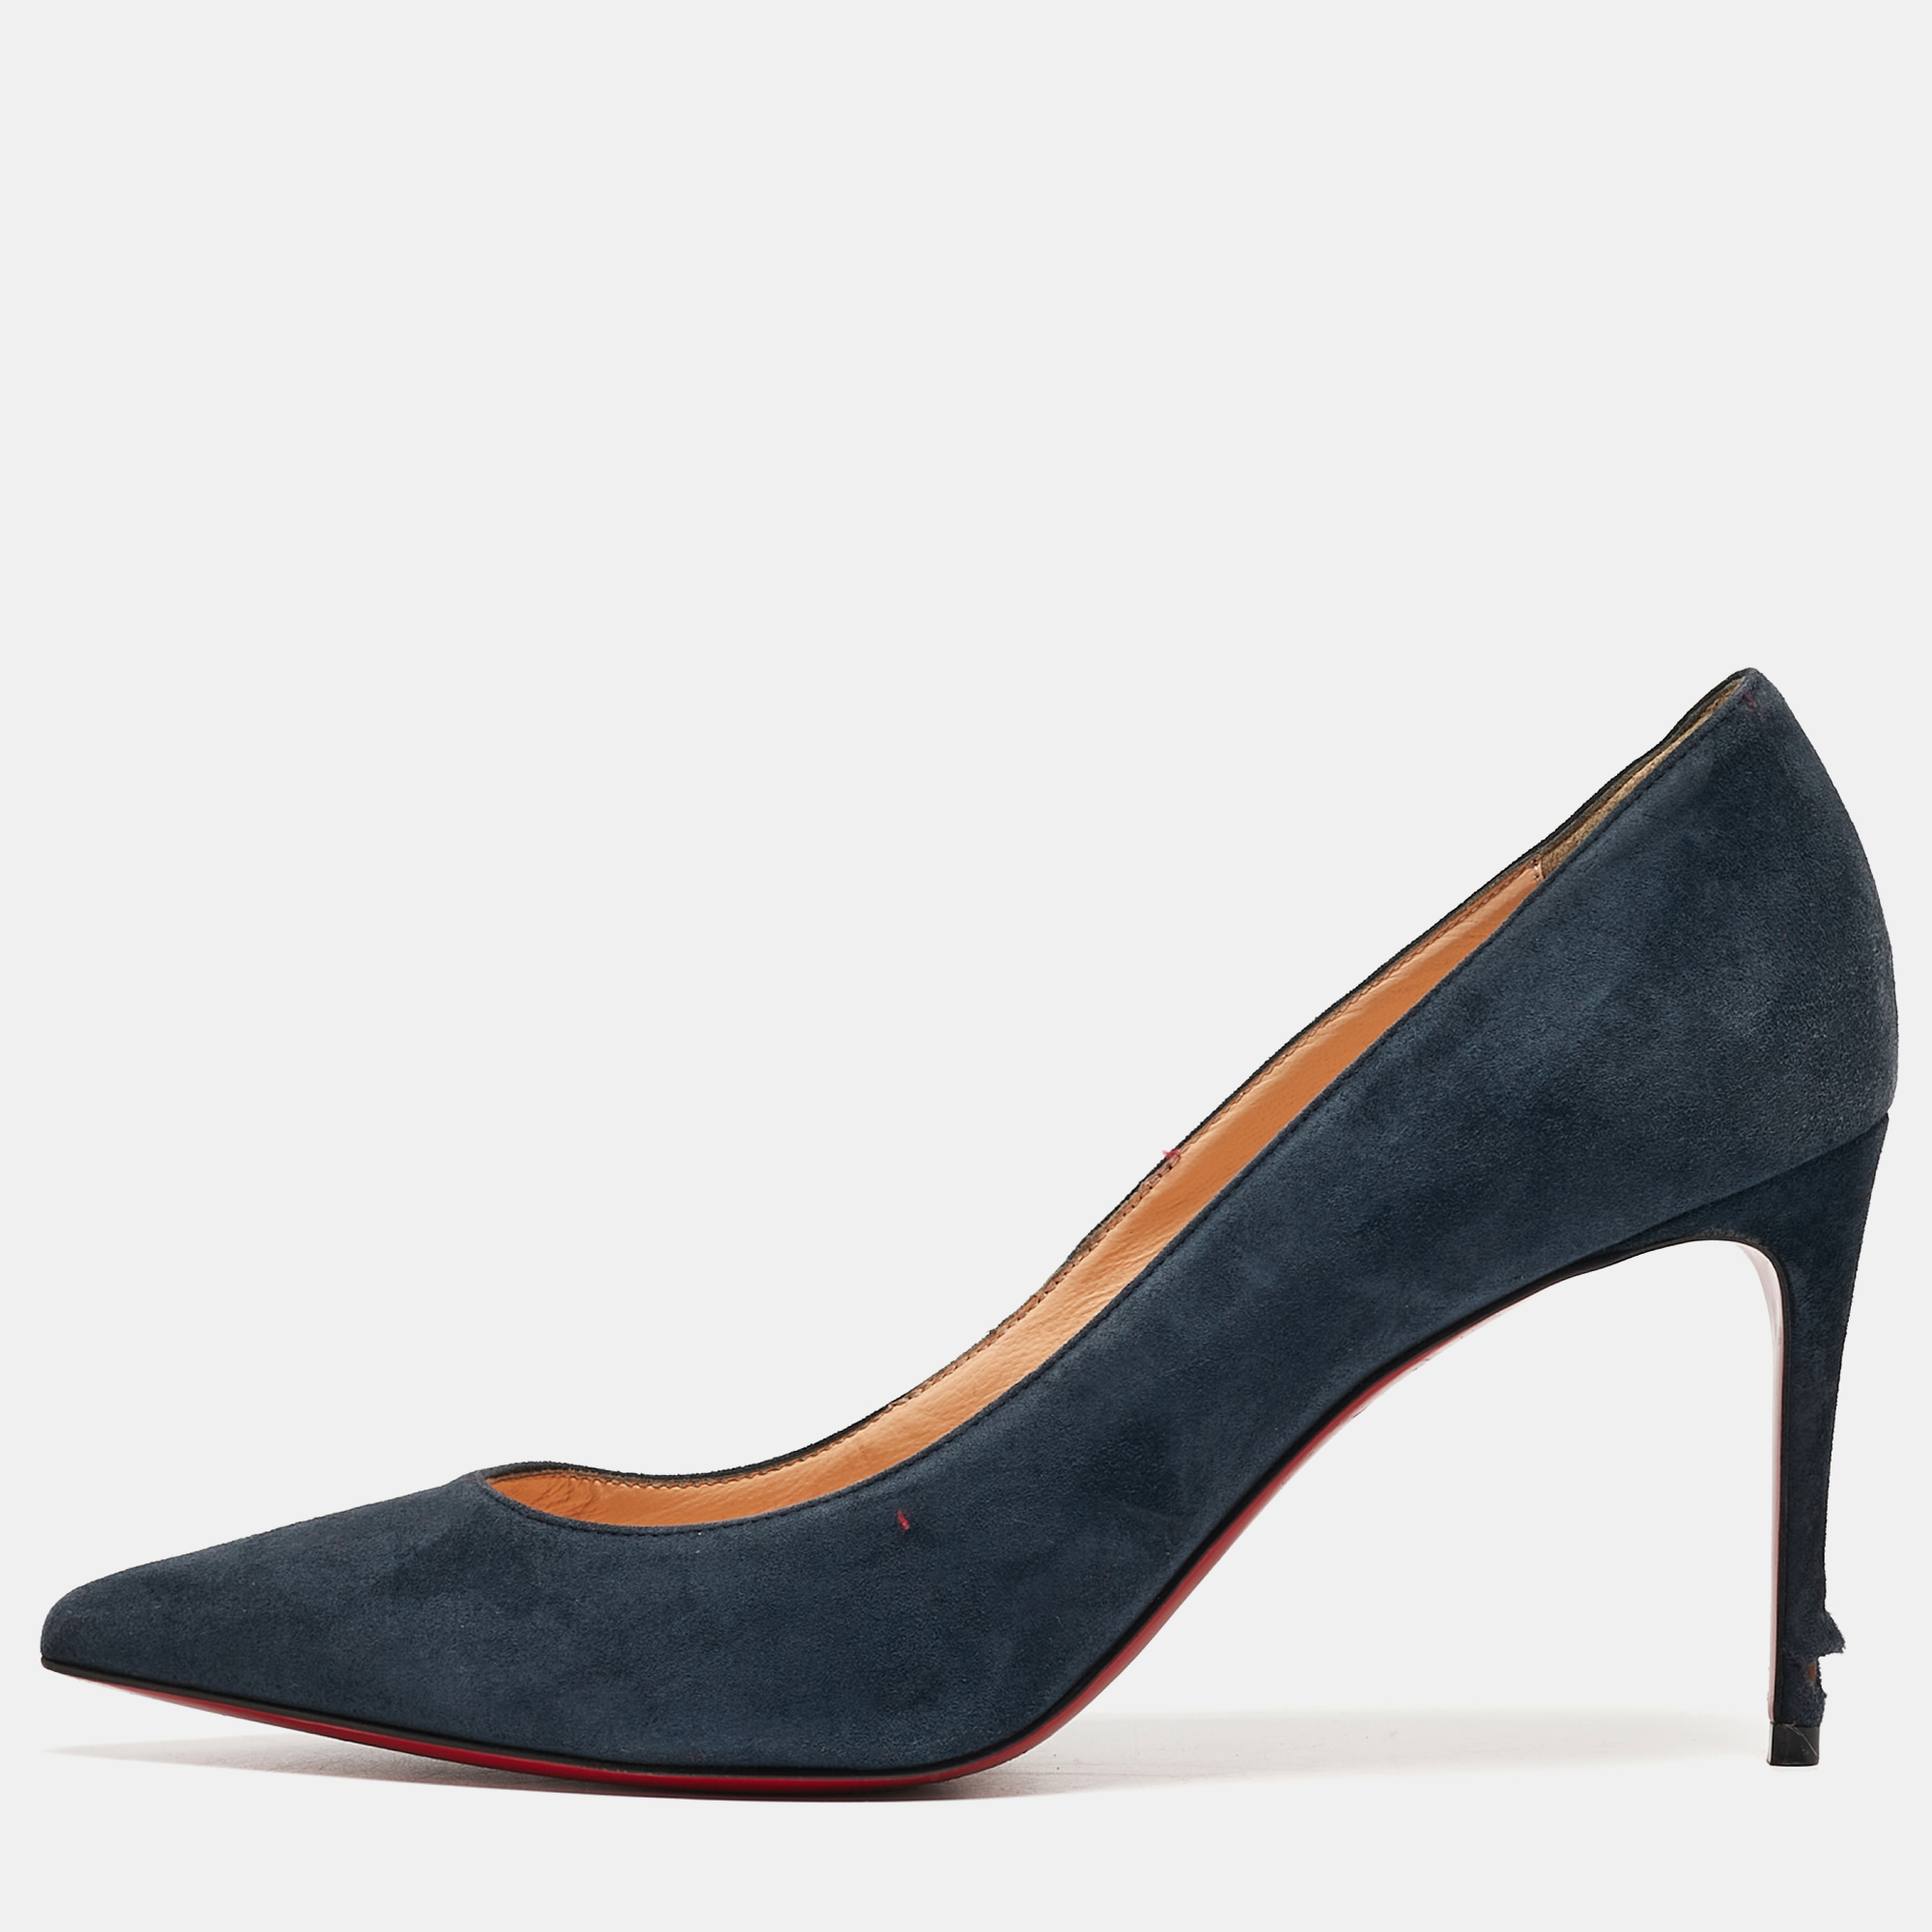 Pre-owned Christian Louboutin Navy Blue Suede Kate Pumps Size 38.5